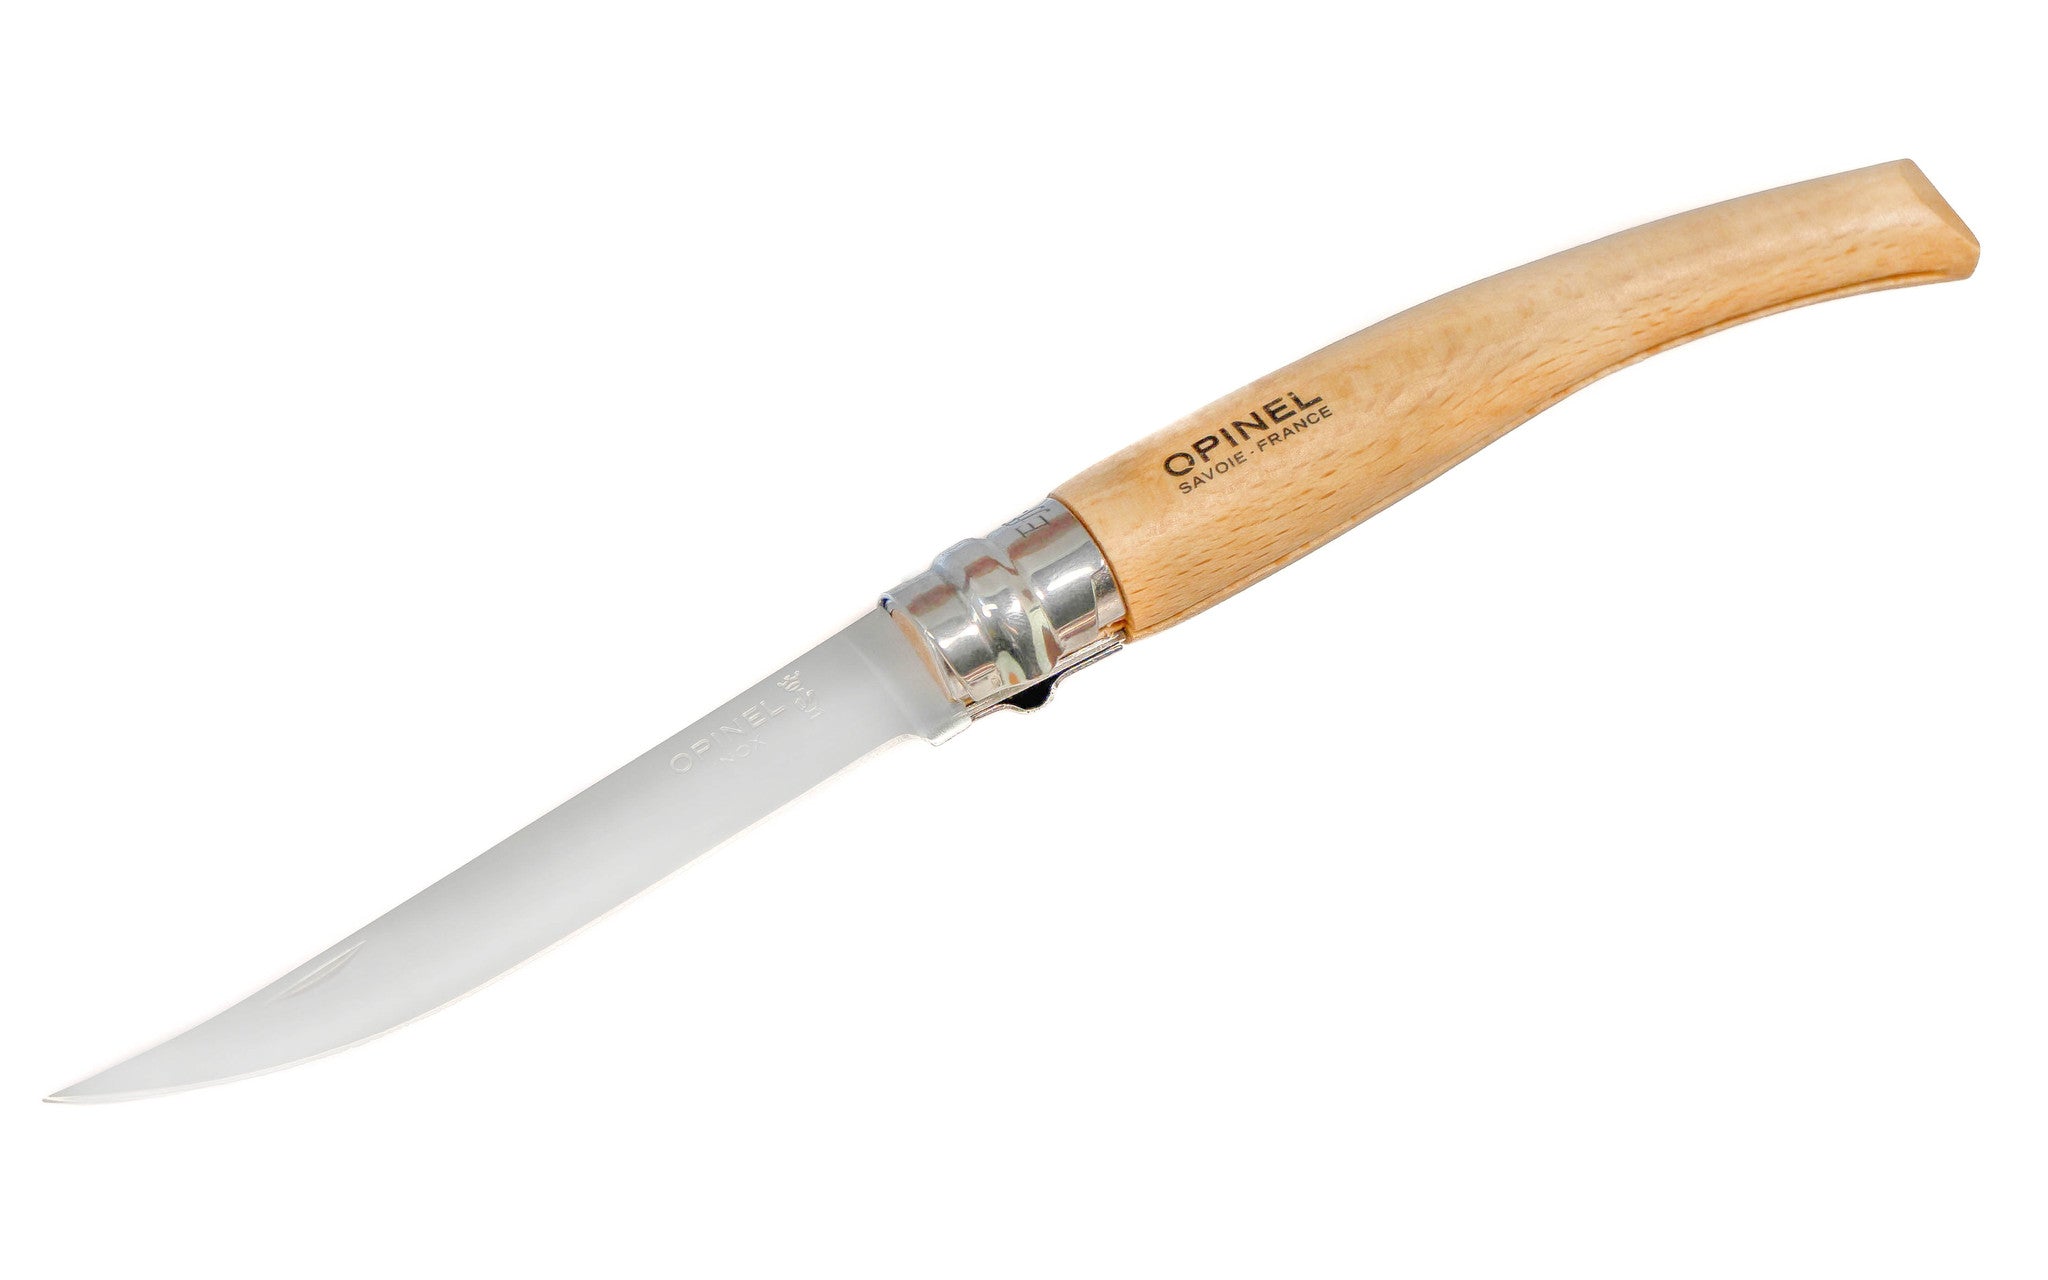 Opinel 12 Explore & 08 Outdoor Knives review